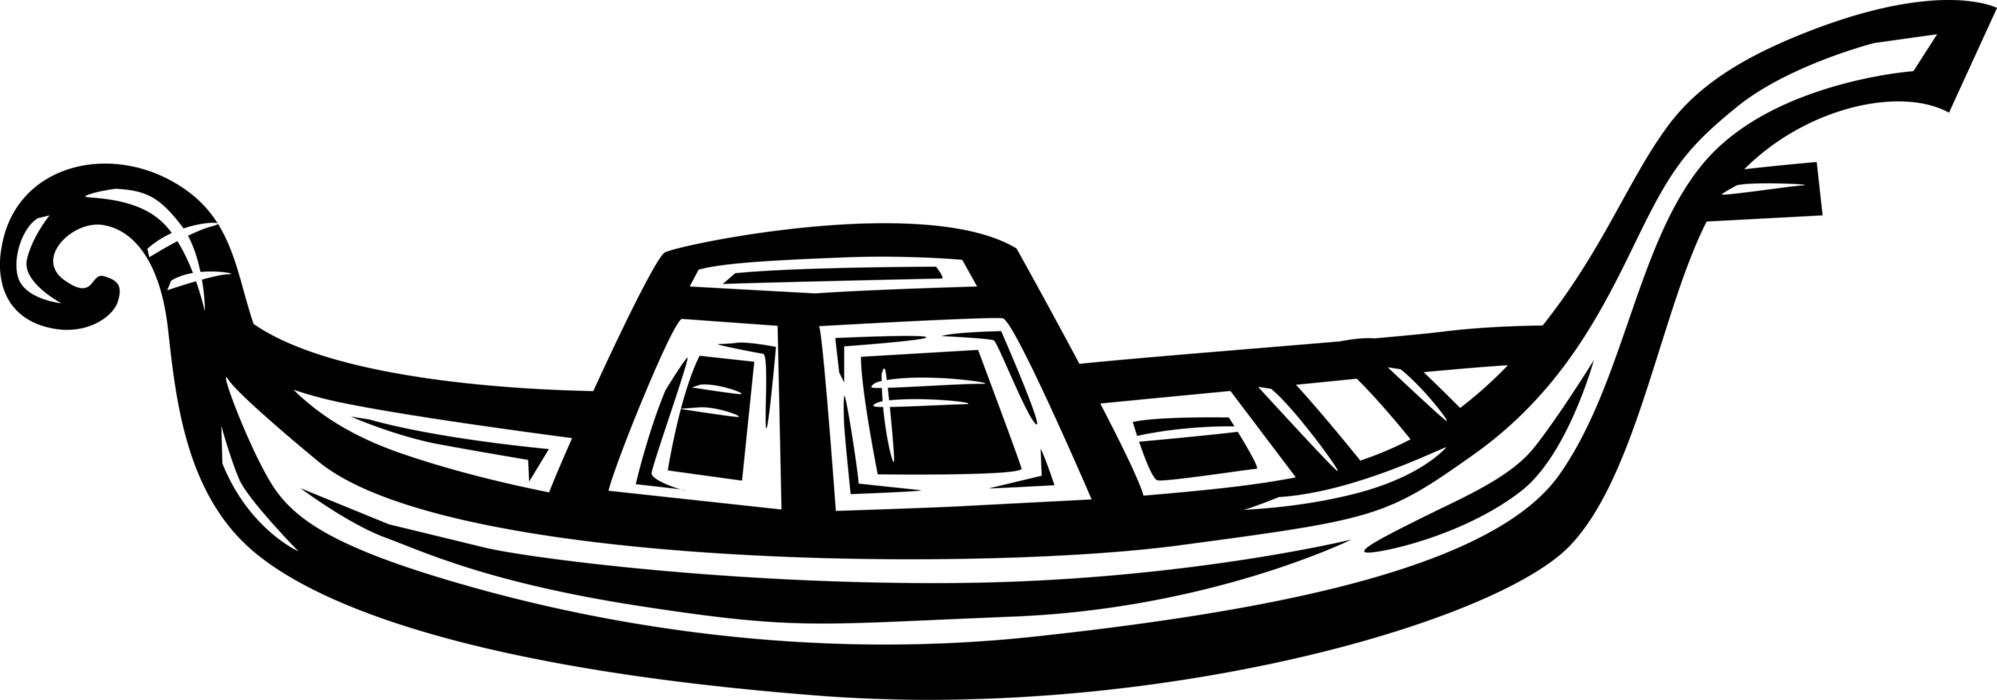 Vector Illustration of Venetian Gondola Steered by Gondolier in Canals of Venice, Italy